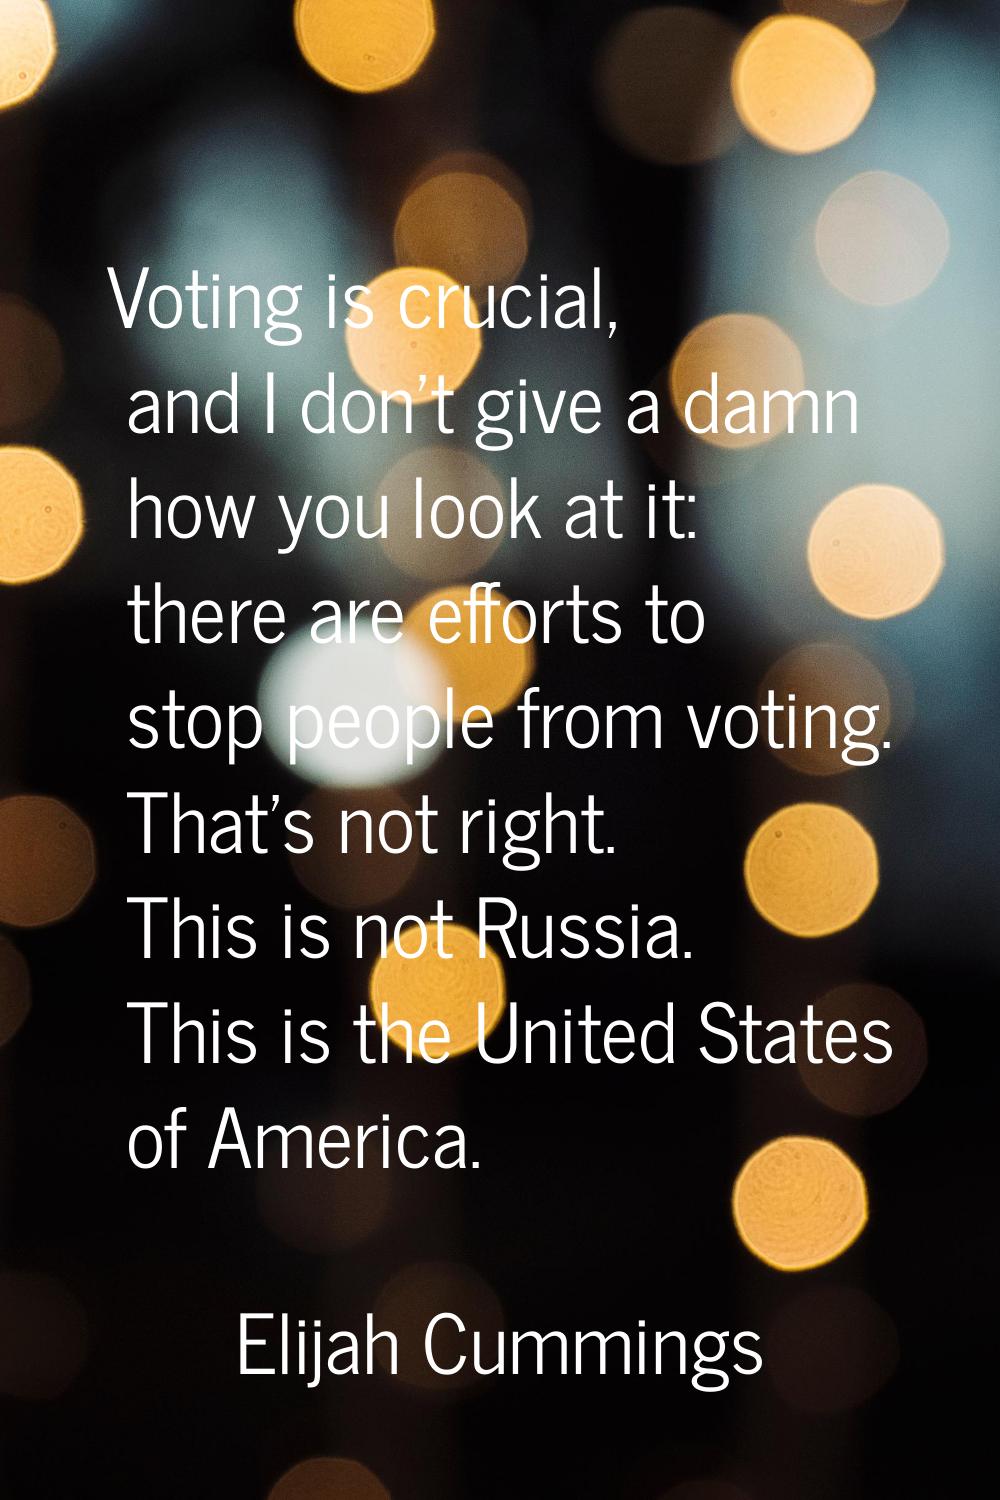 Voting is crucial, and I don't give a damn how you look at it: there are efforts to stop people fro